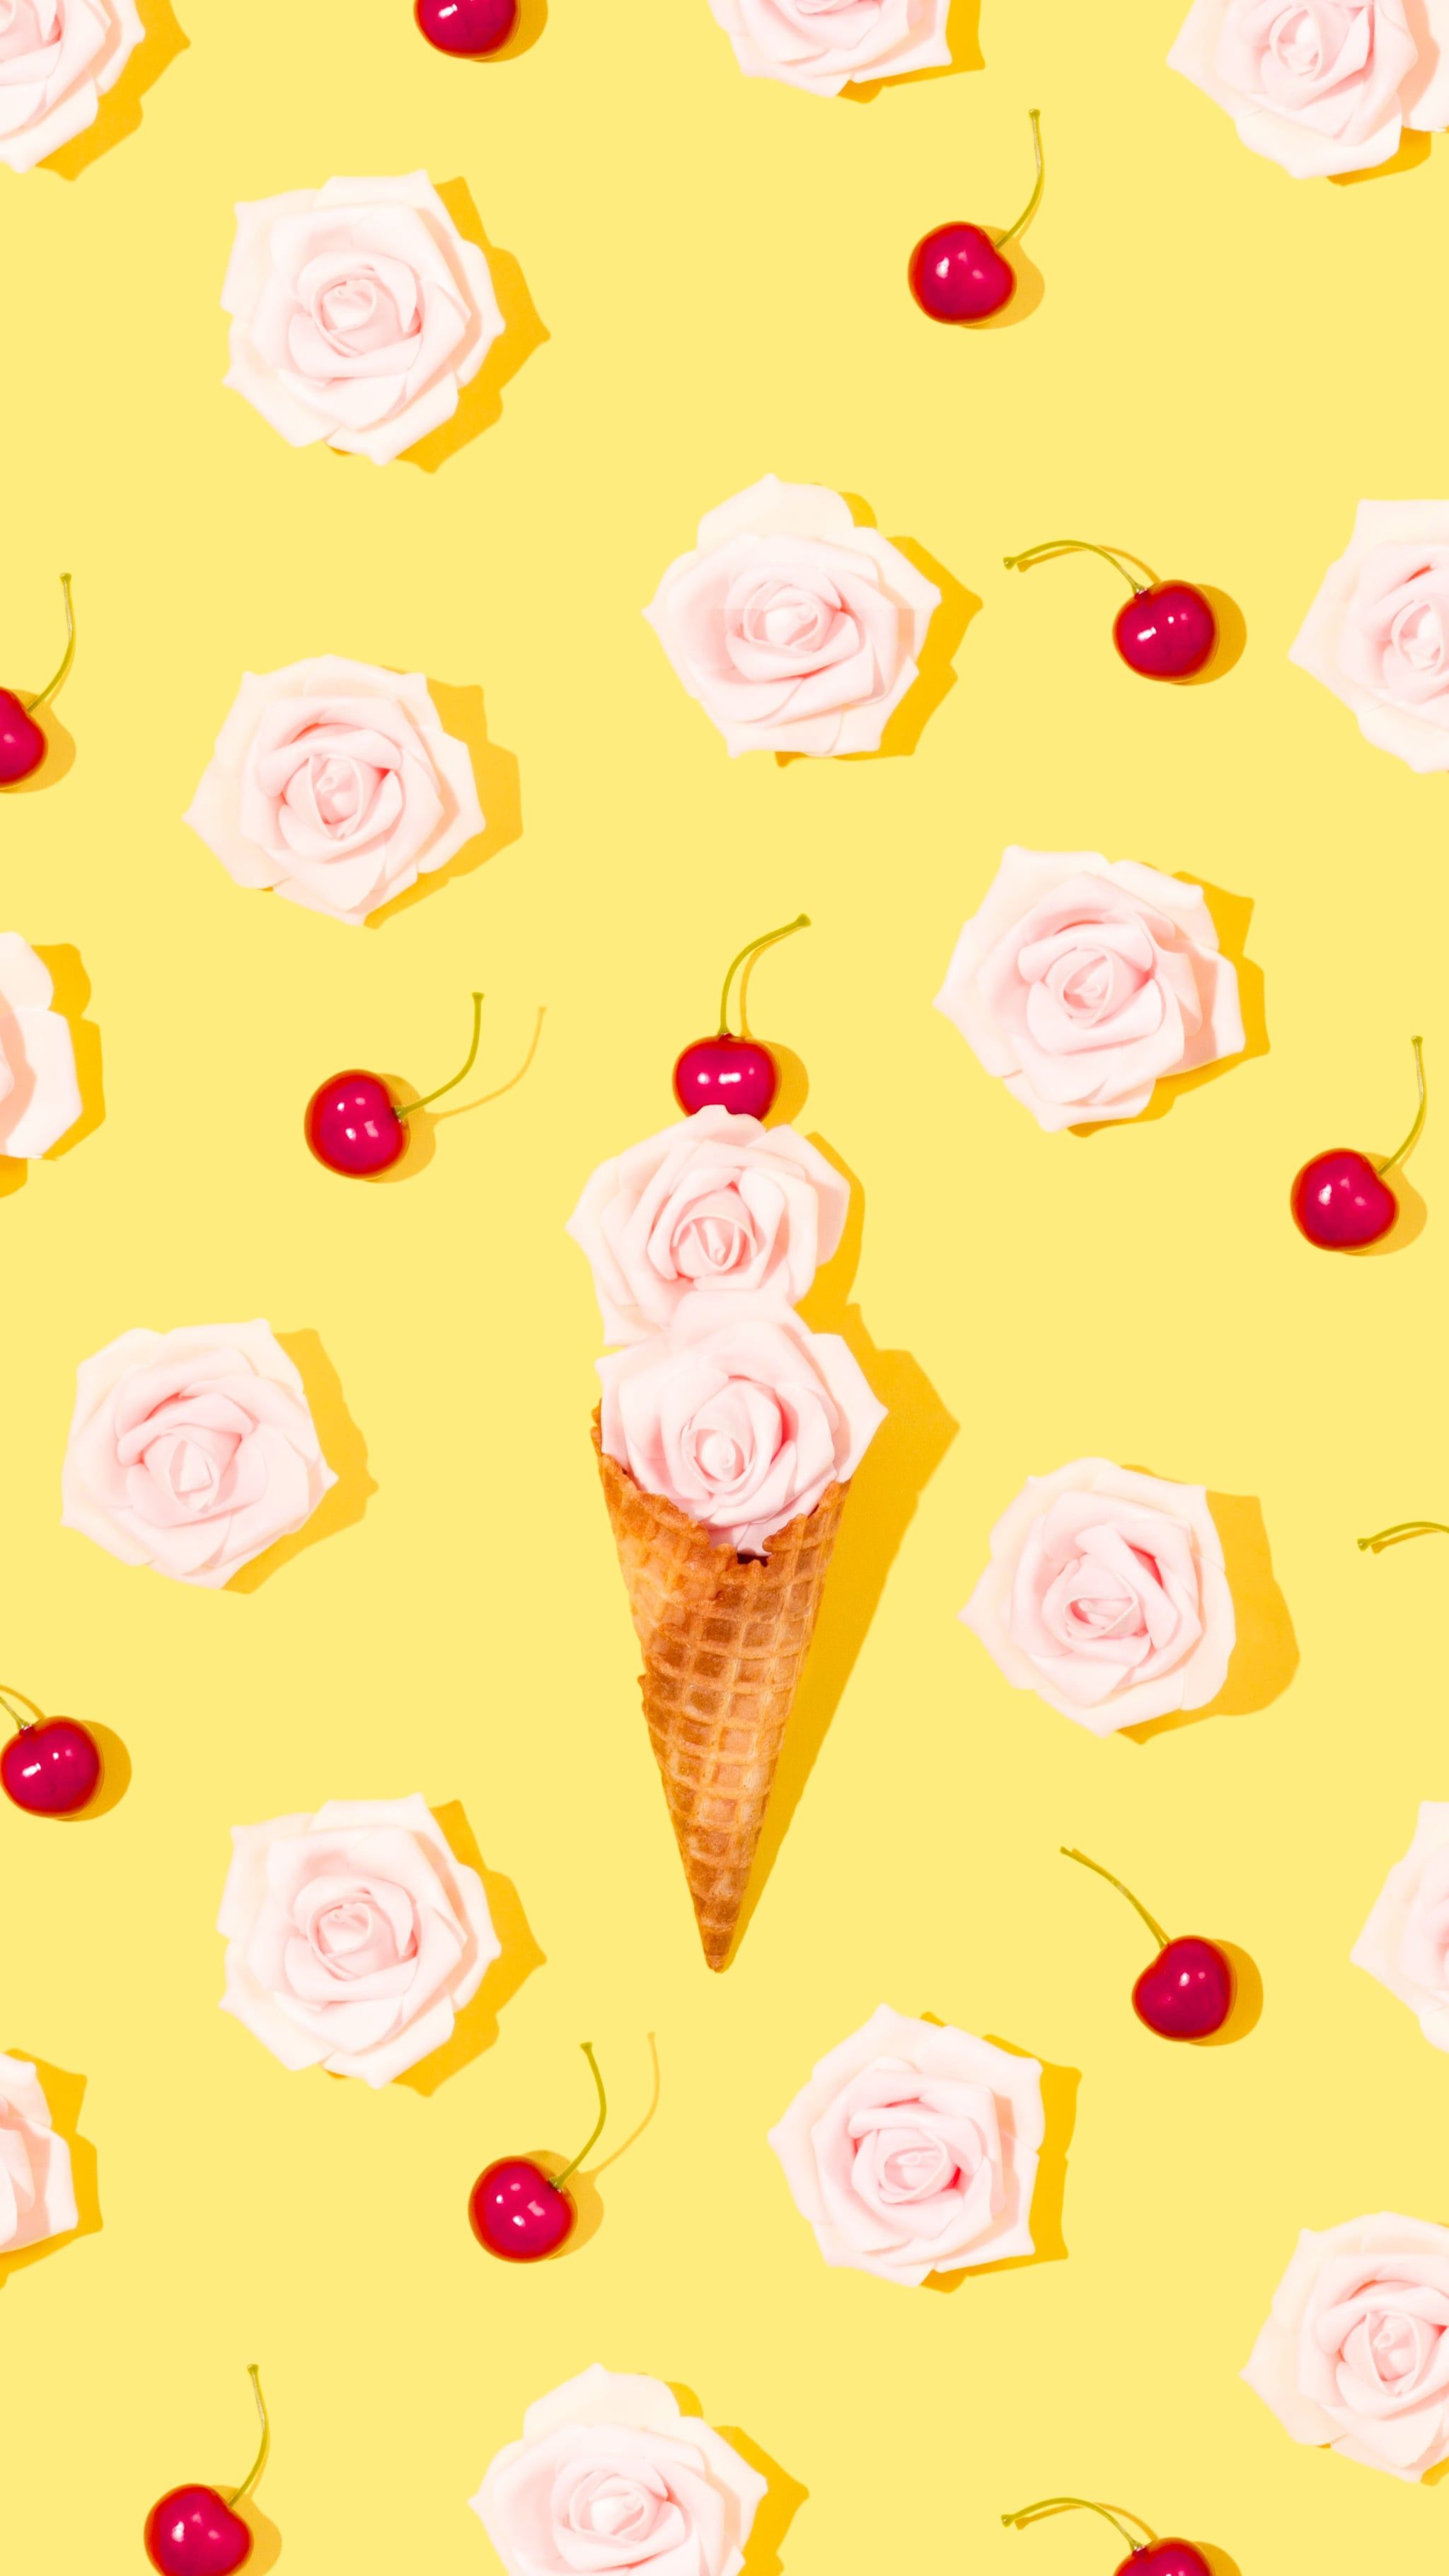 A yellow background with cherries and roses - Yellow iphone, cherry